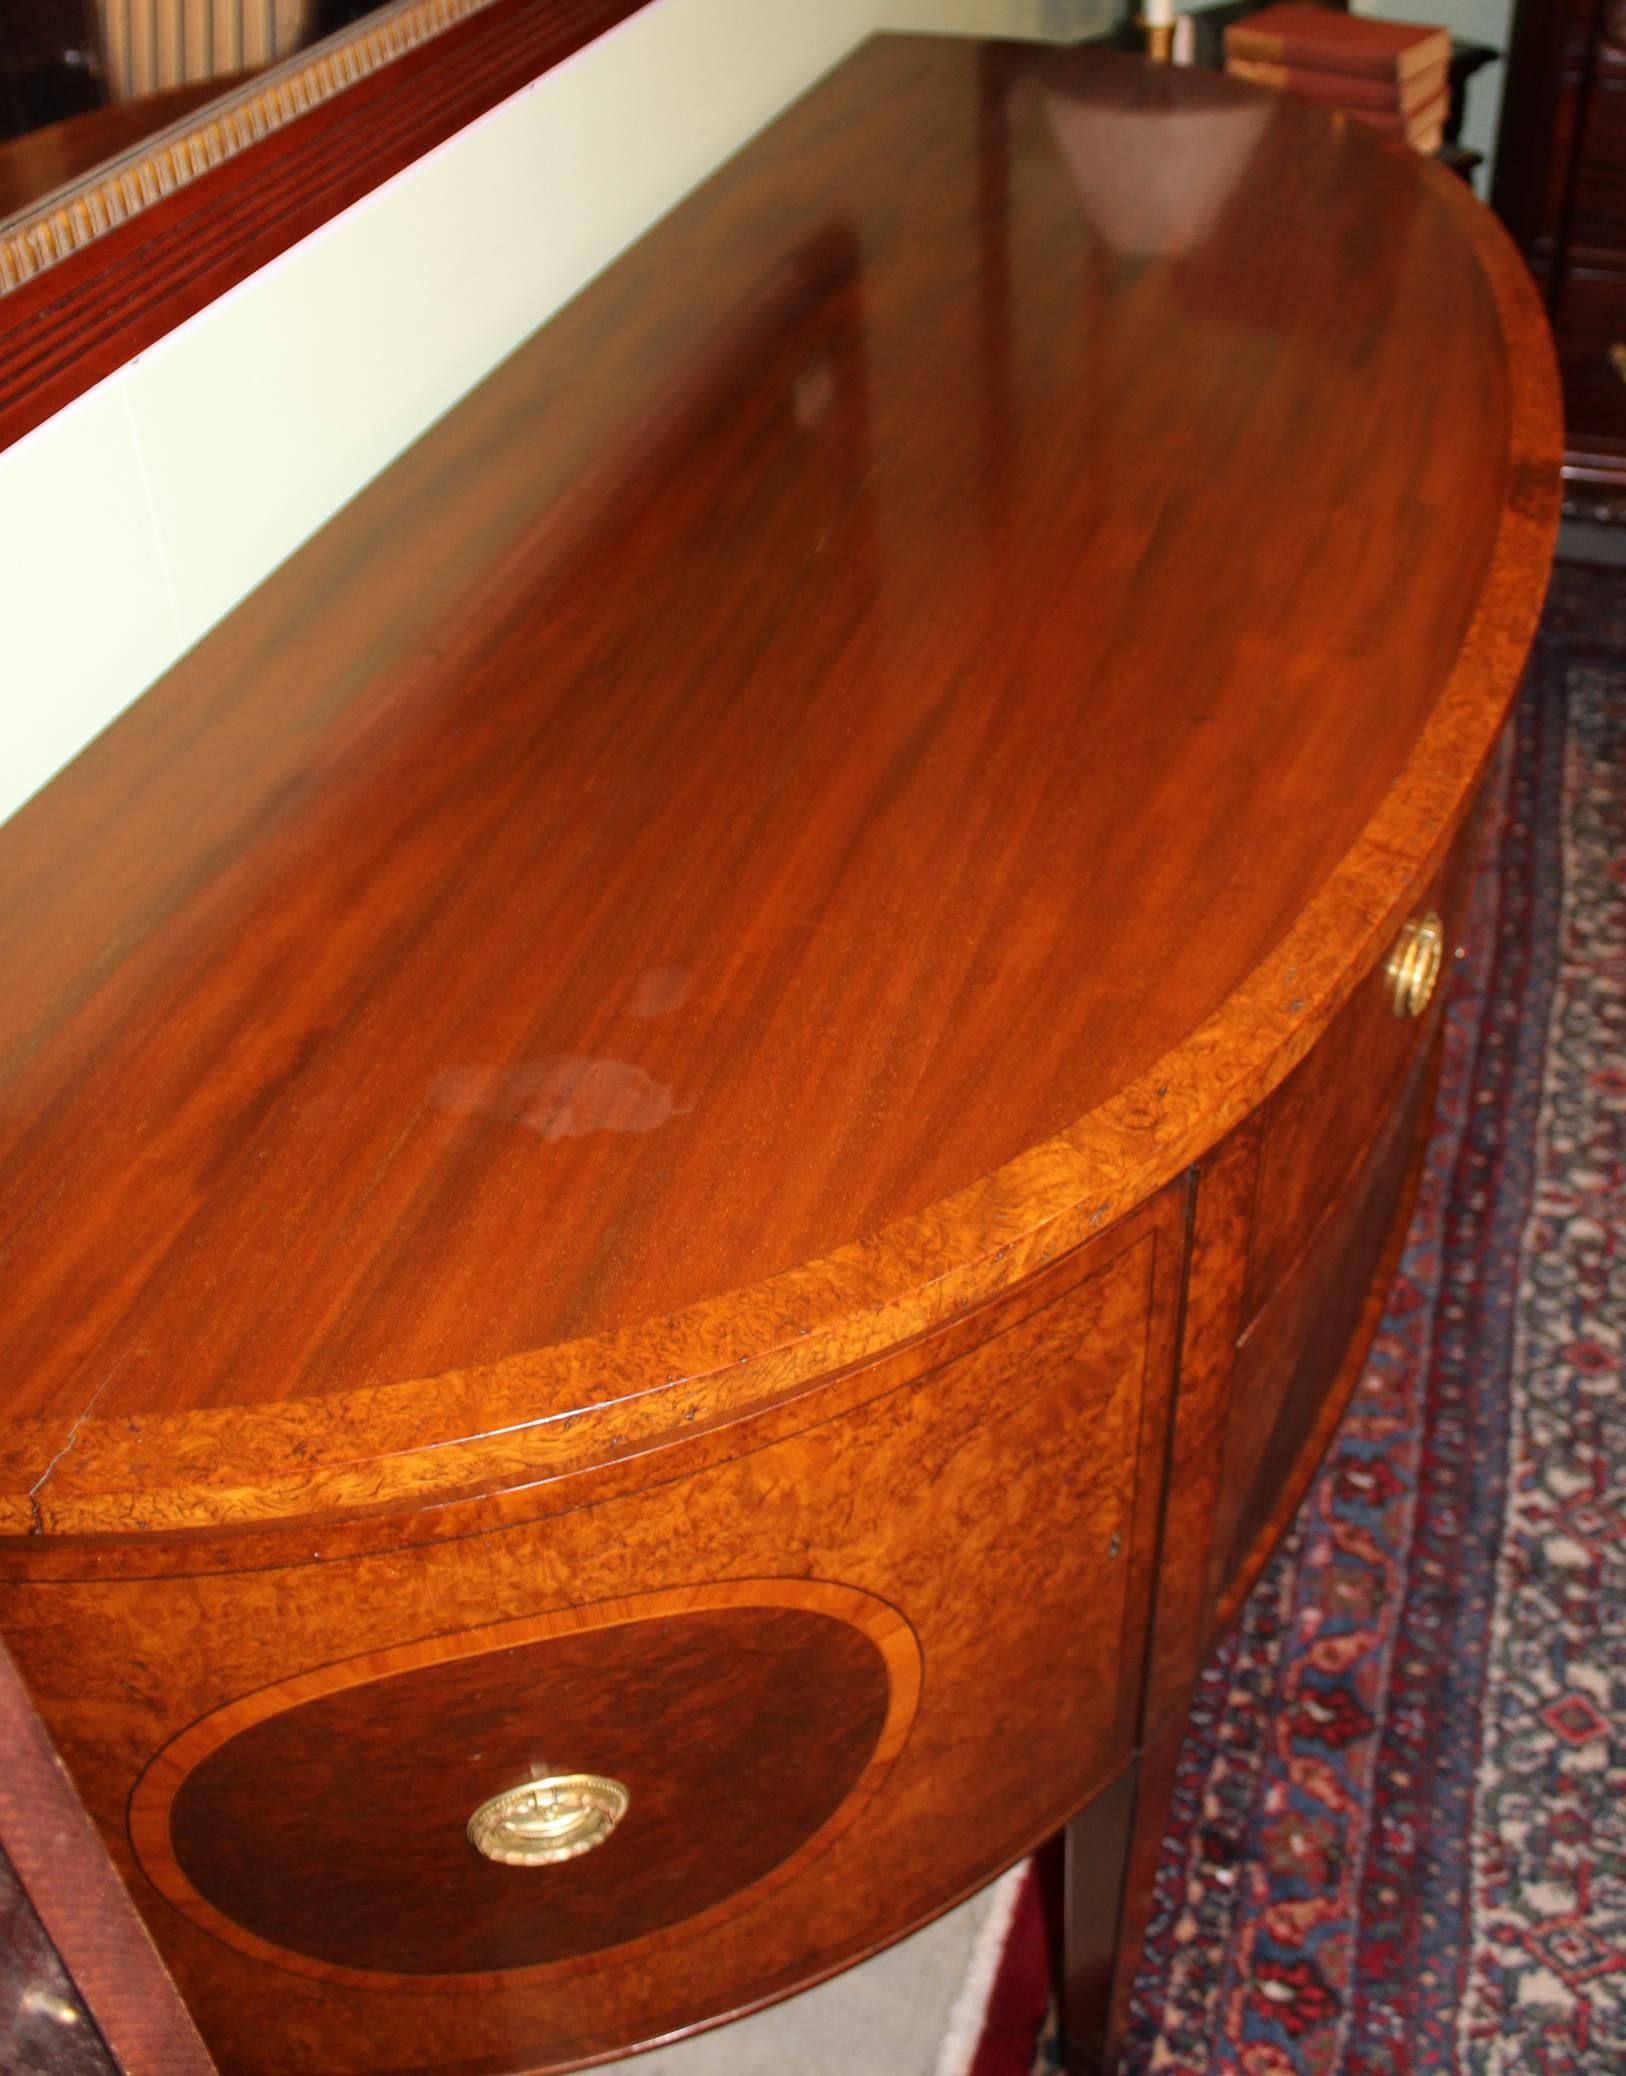 Carved Demilune Mahogany Sideboard or Server with Burled Walnut and Tambour Doors